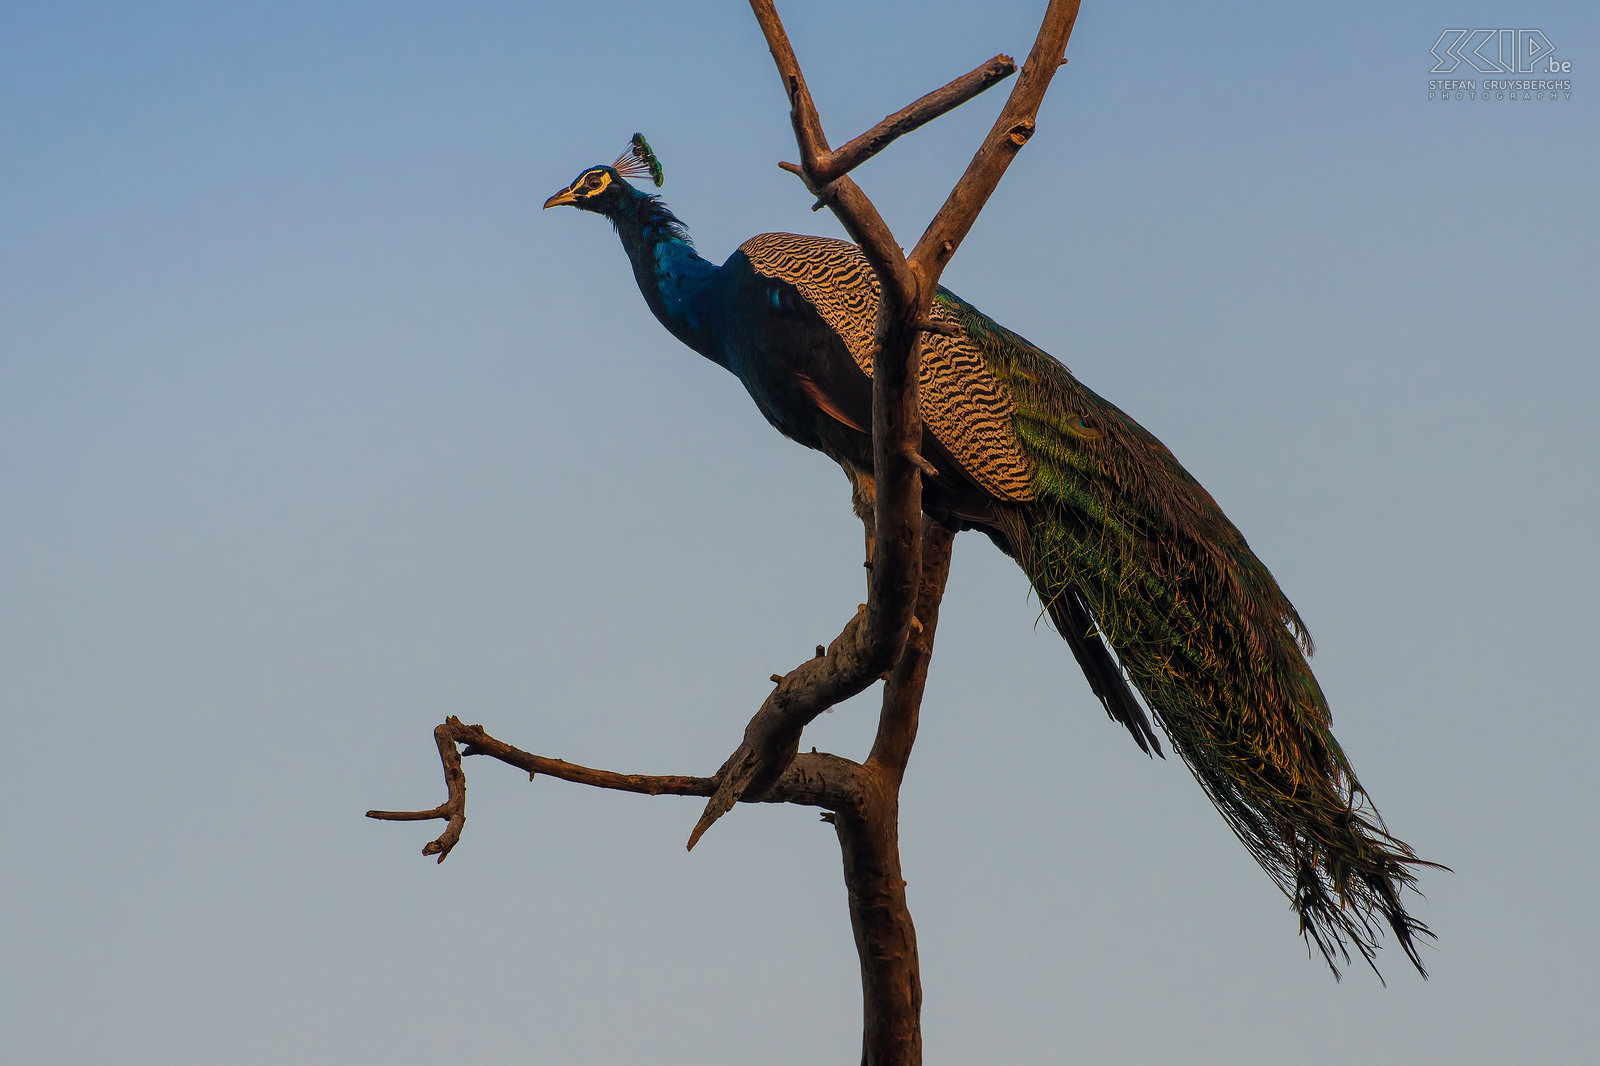 Keoladeo - Peacock An Indian Peafowl (Blue Peafowl/Pavo cristatus) high up in a tree in the early morning in Keoladeo national park. Stefan Cruysberghs